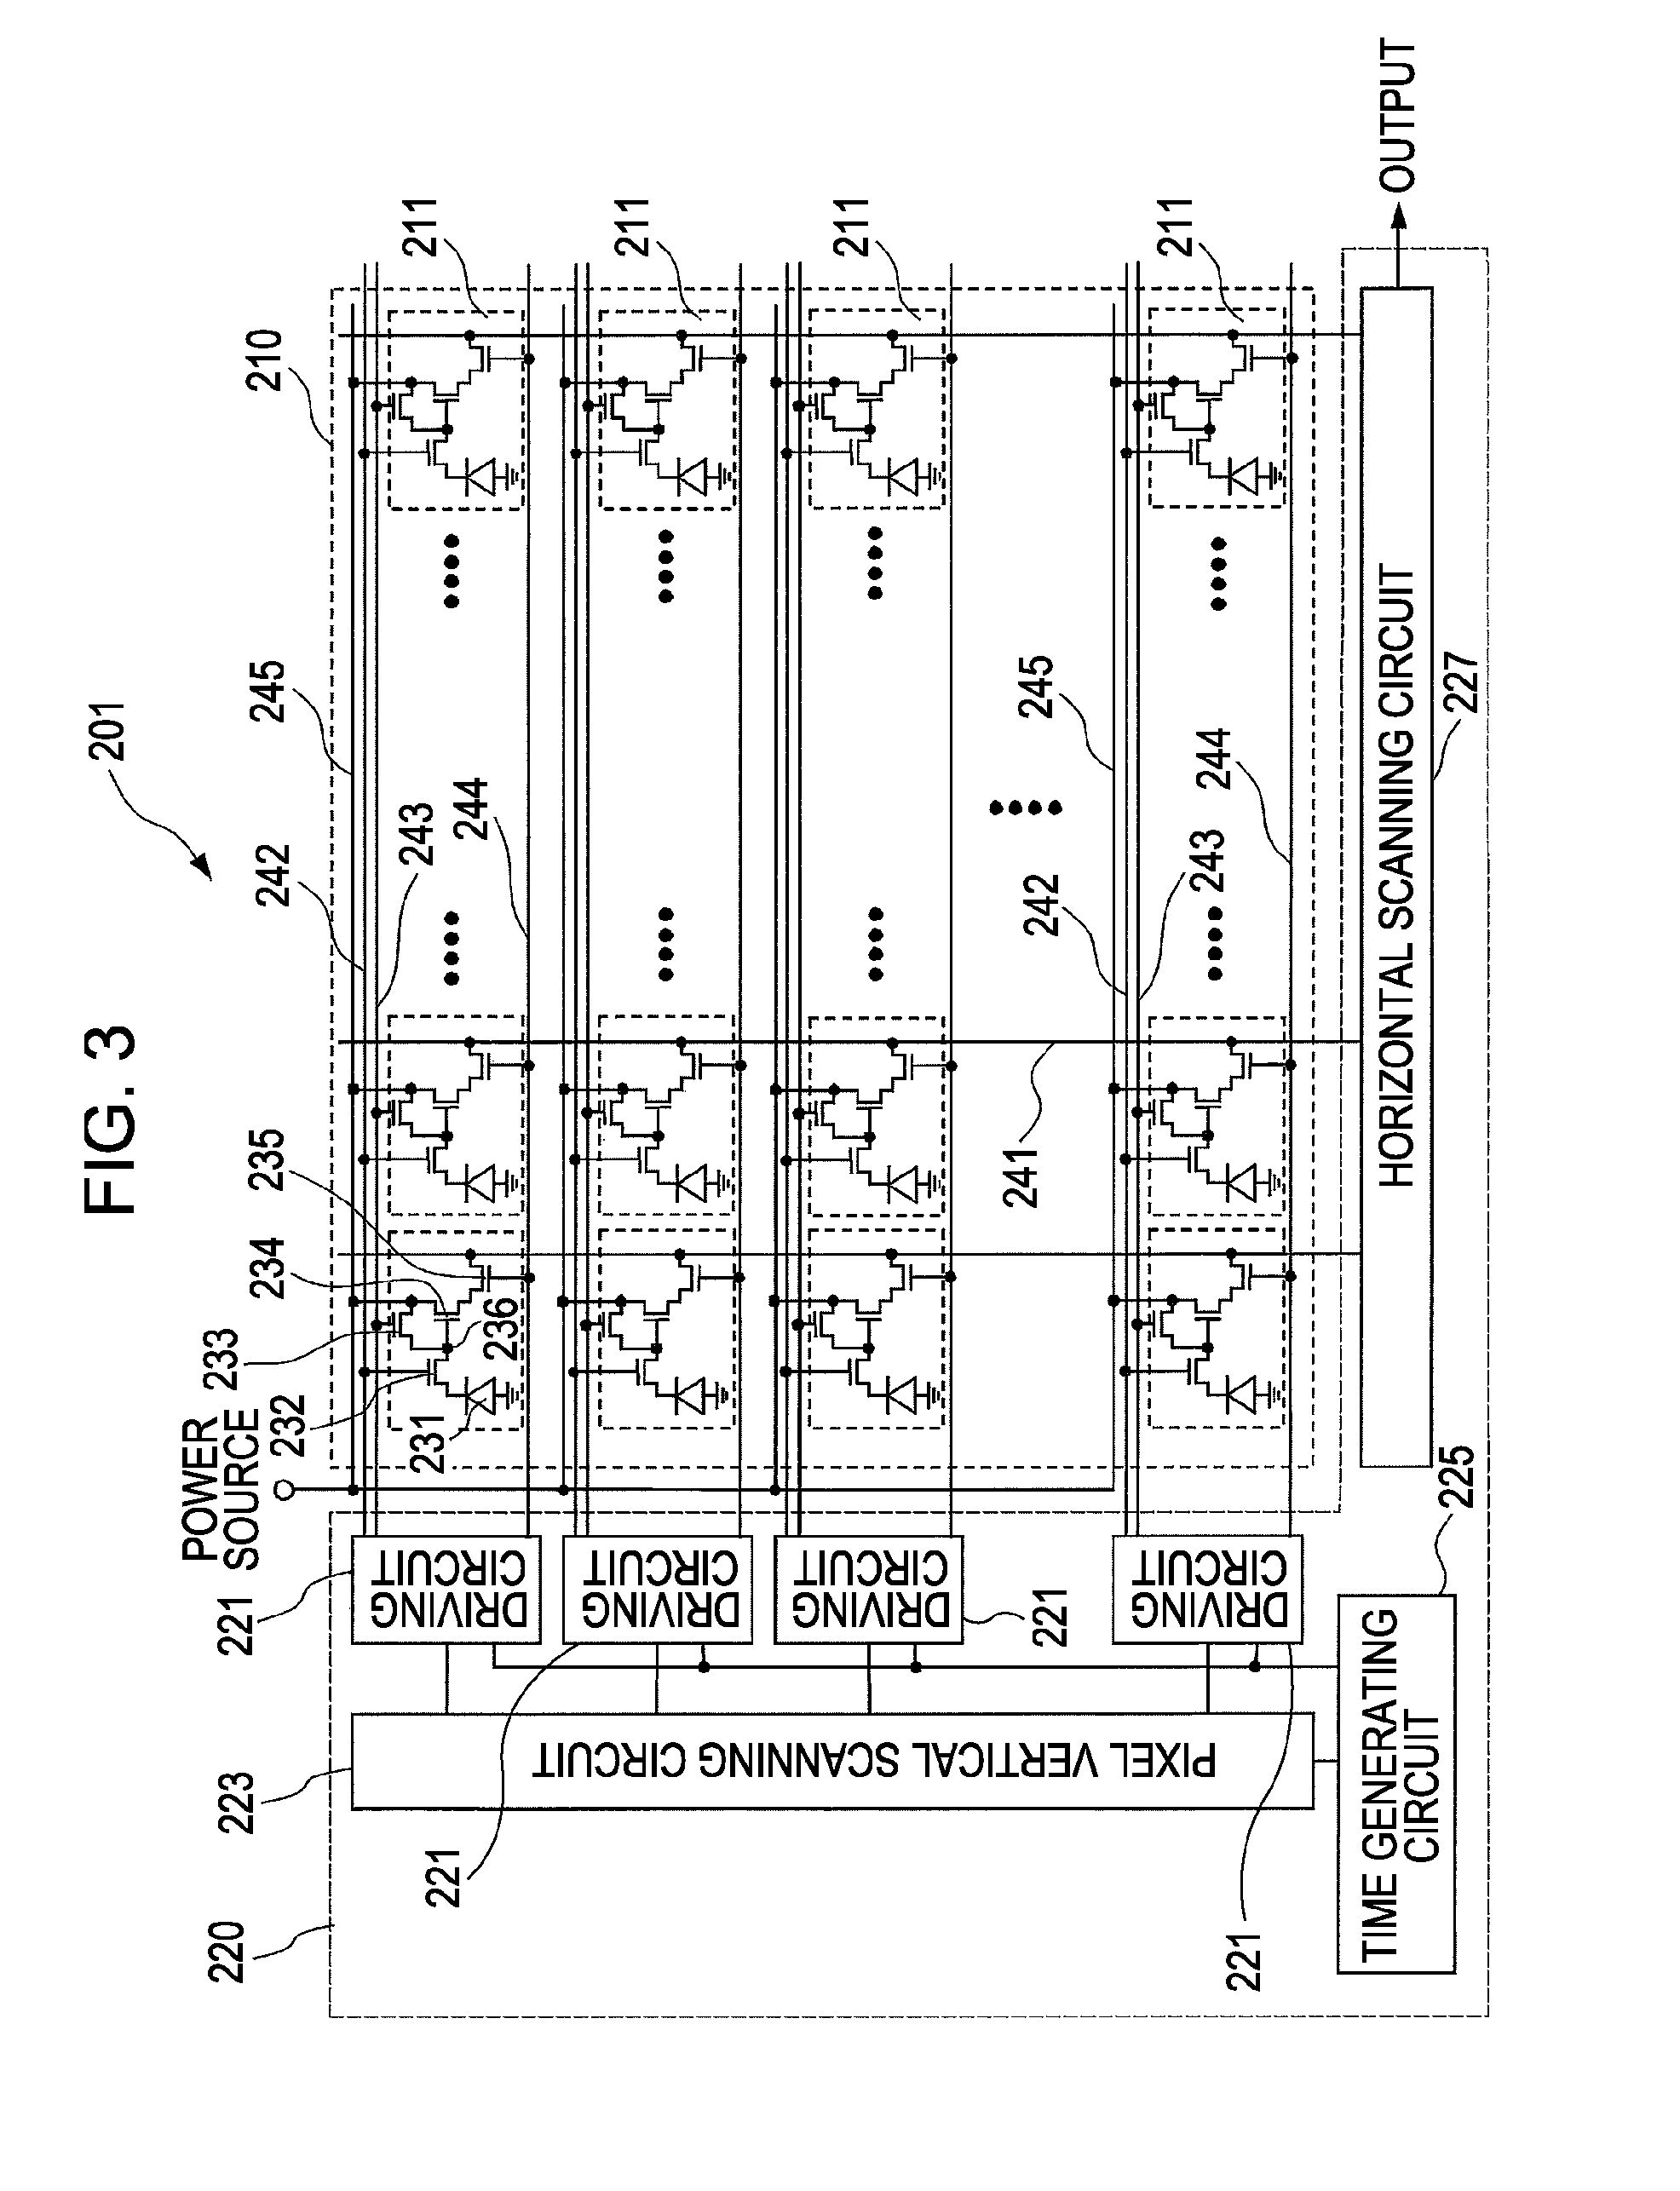 Solid-state image capturing device, method of manufacturing solid-state image capturing device, and image capturing apparatus